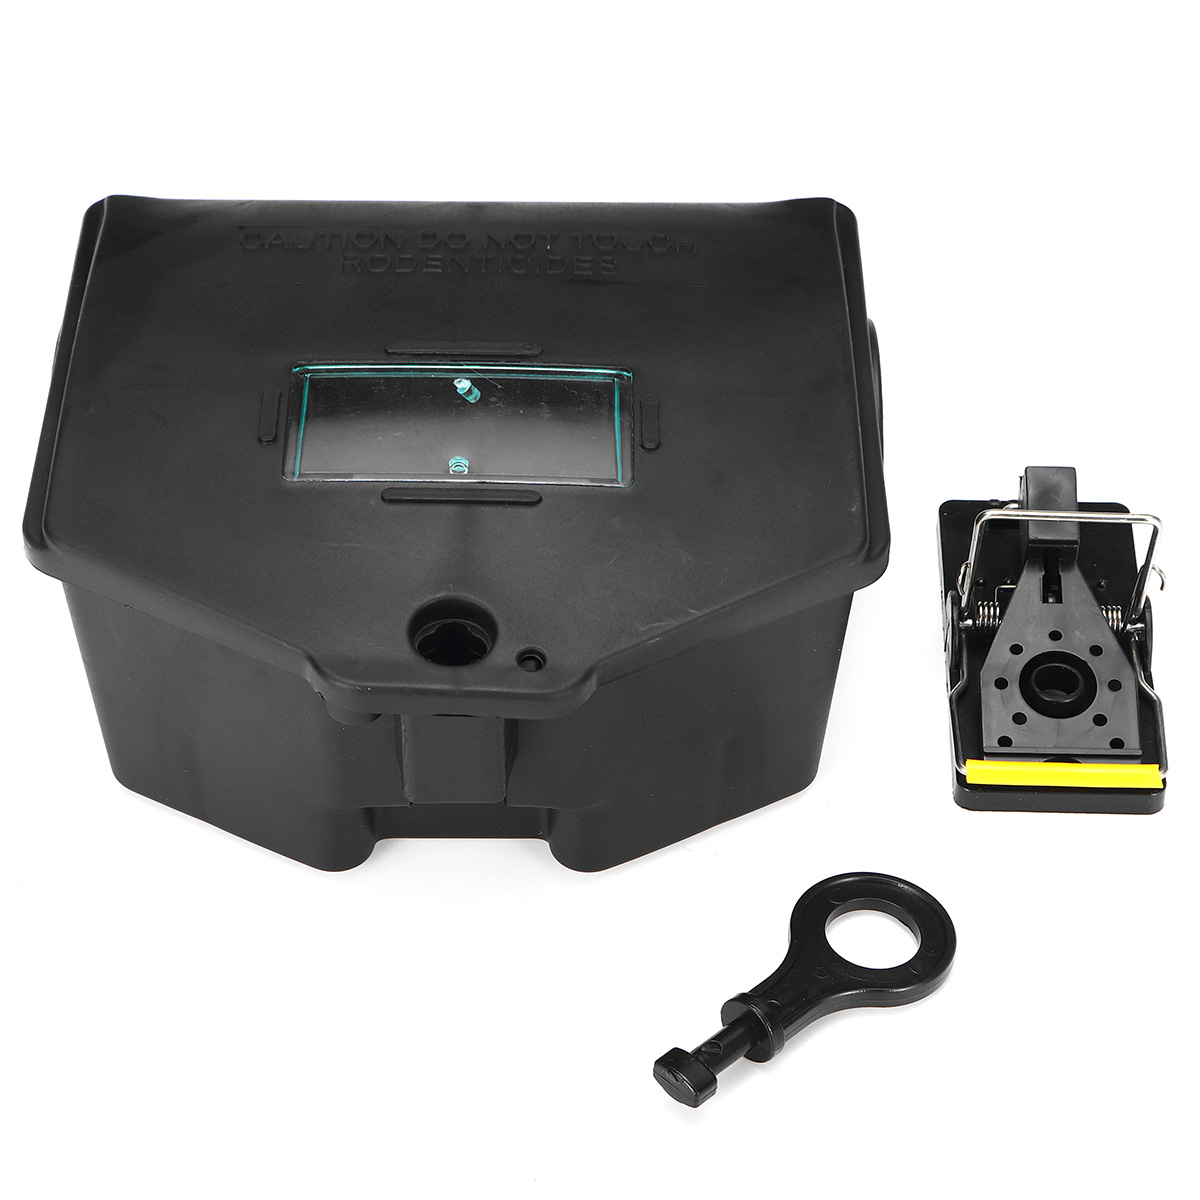 Rat-Mouse-Mice-Rodent-Bait-Block-Station-Box-Case-Trap-amp-Key-Hunting-Trap-for-Home-Farm-Hotel-1635967